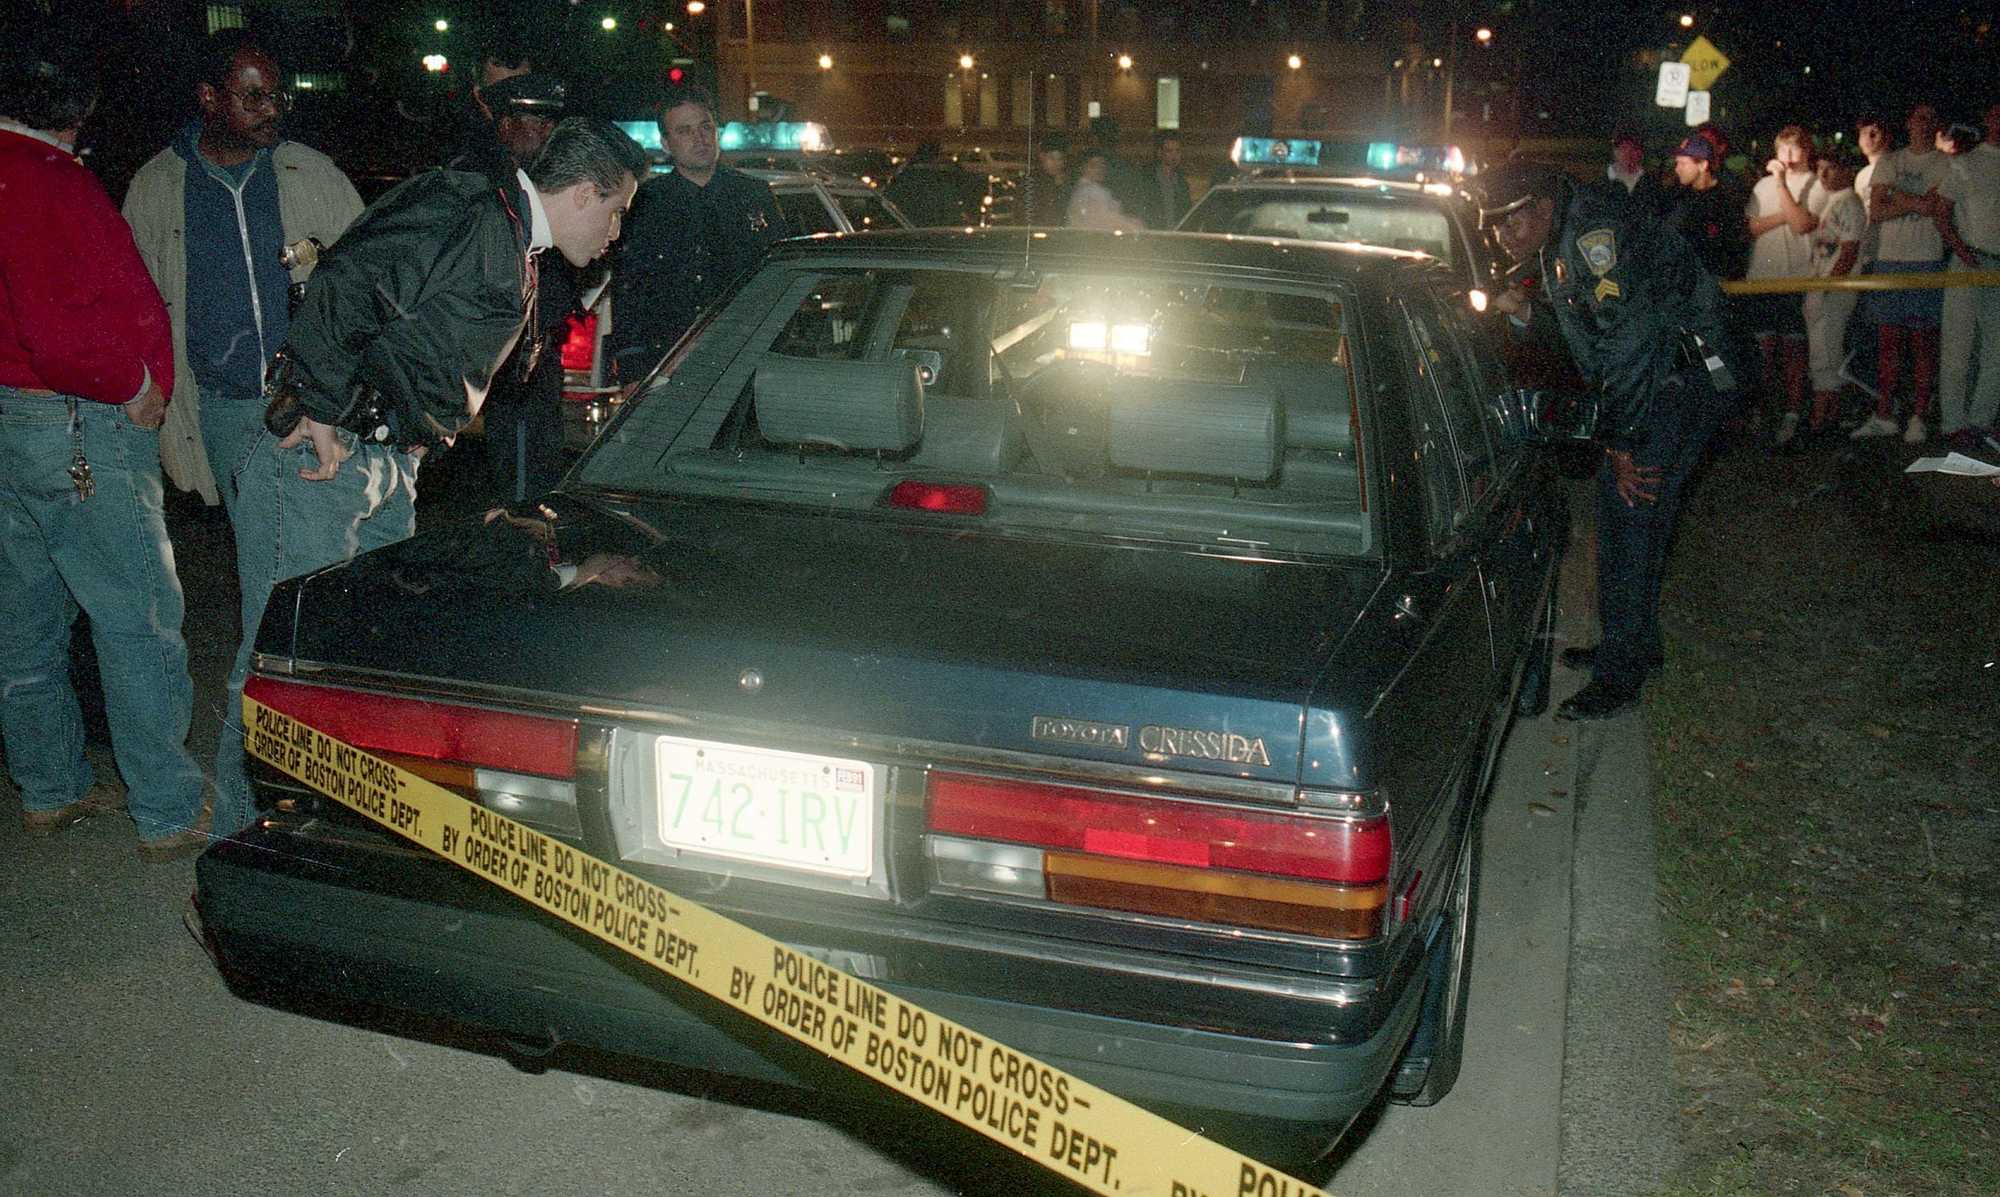 Police examined the Stuarts' car on St. Alphonsus Street in Mission Hill on Oct. 23, 1989.